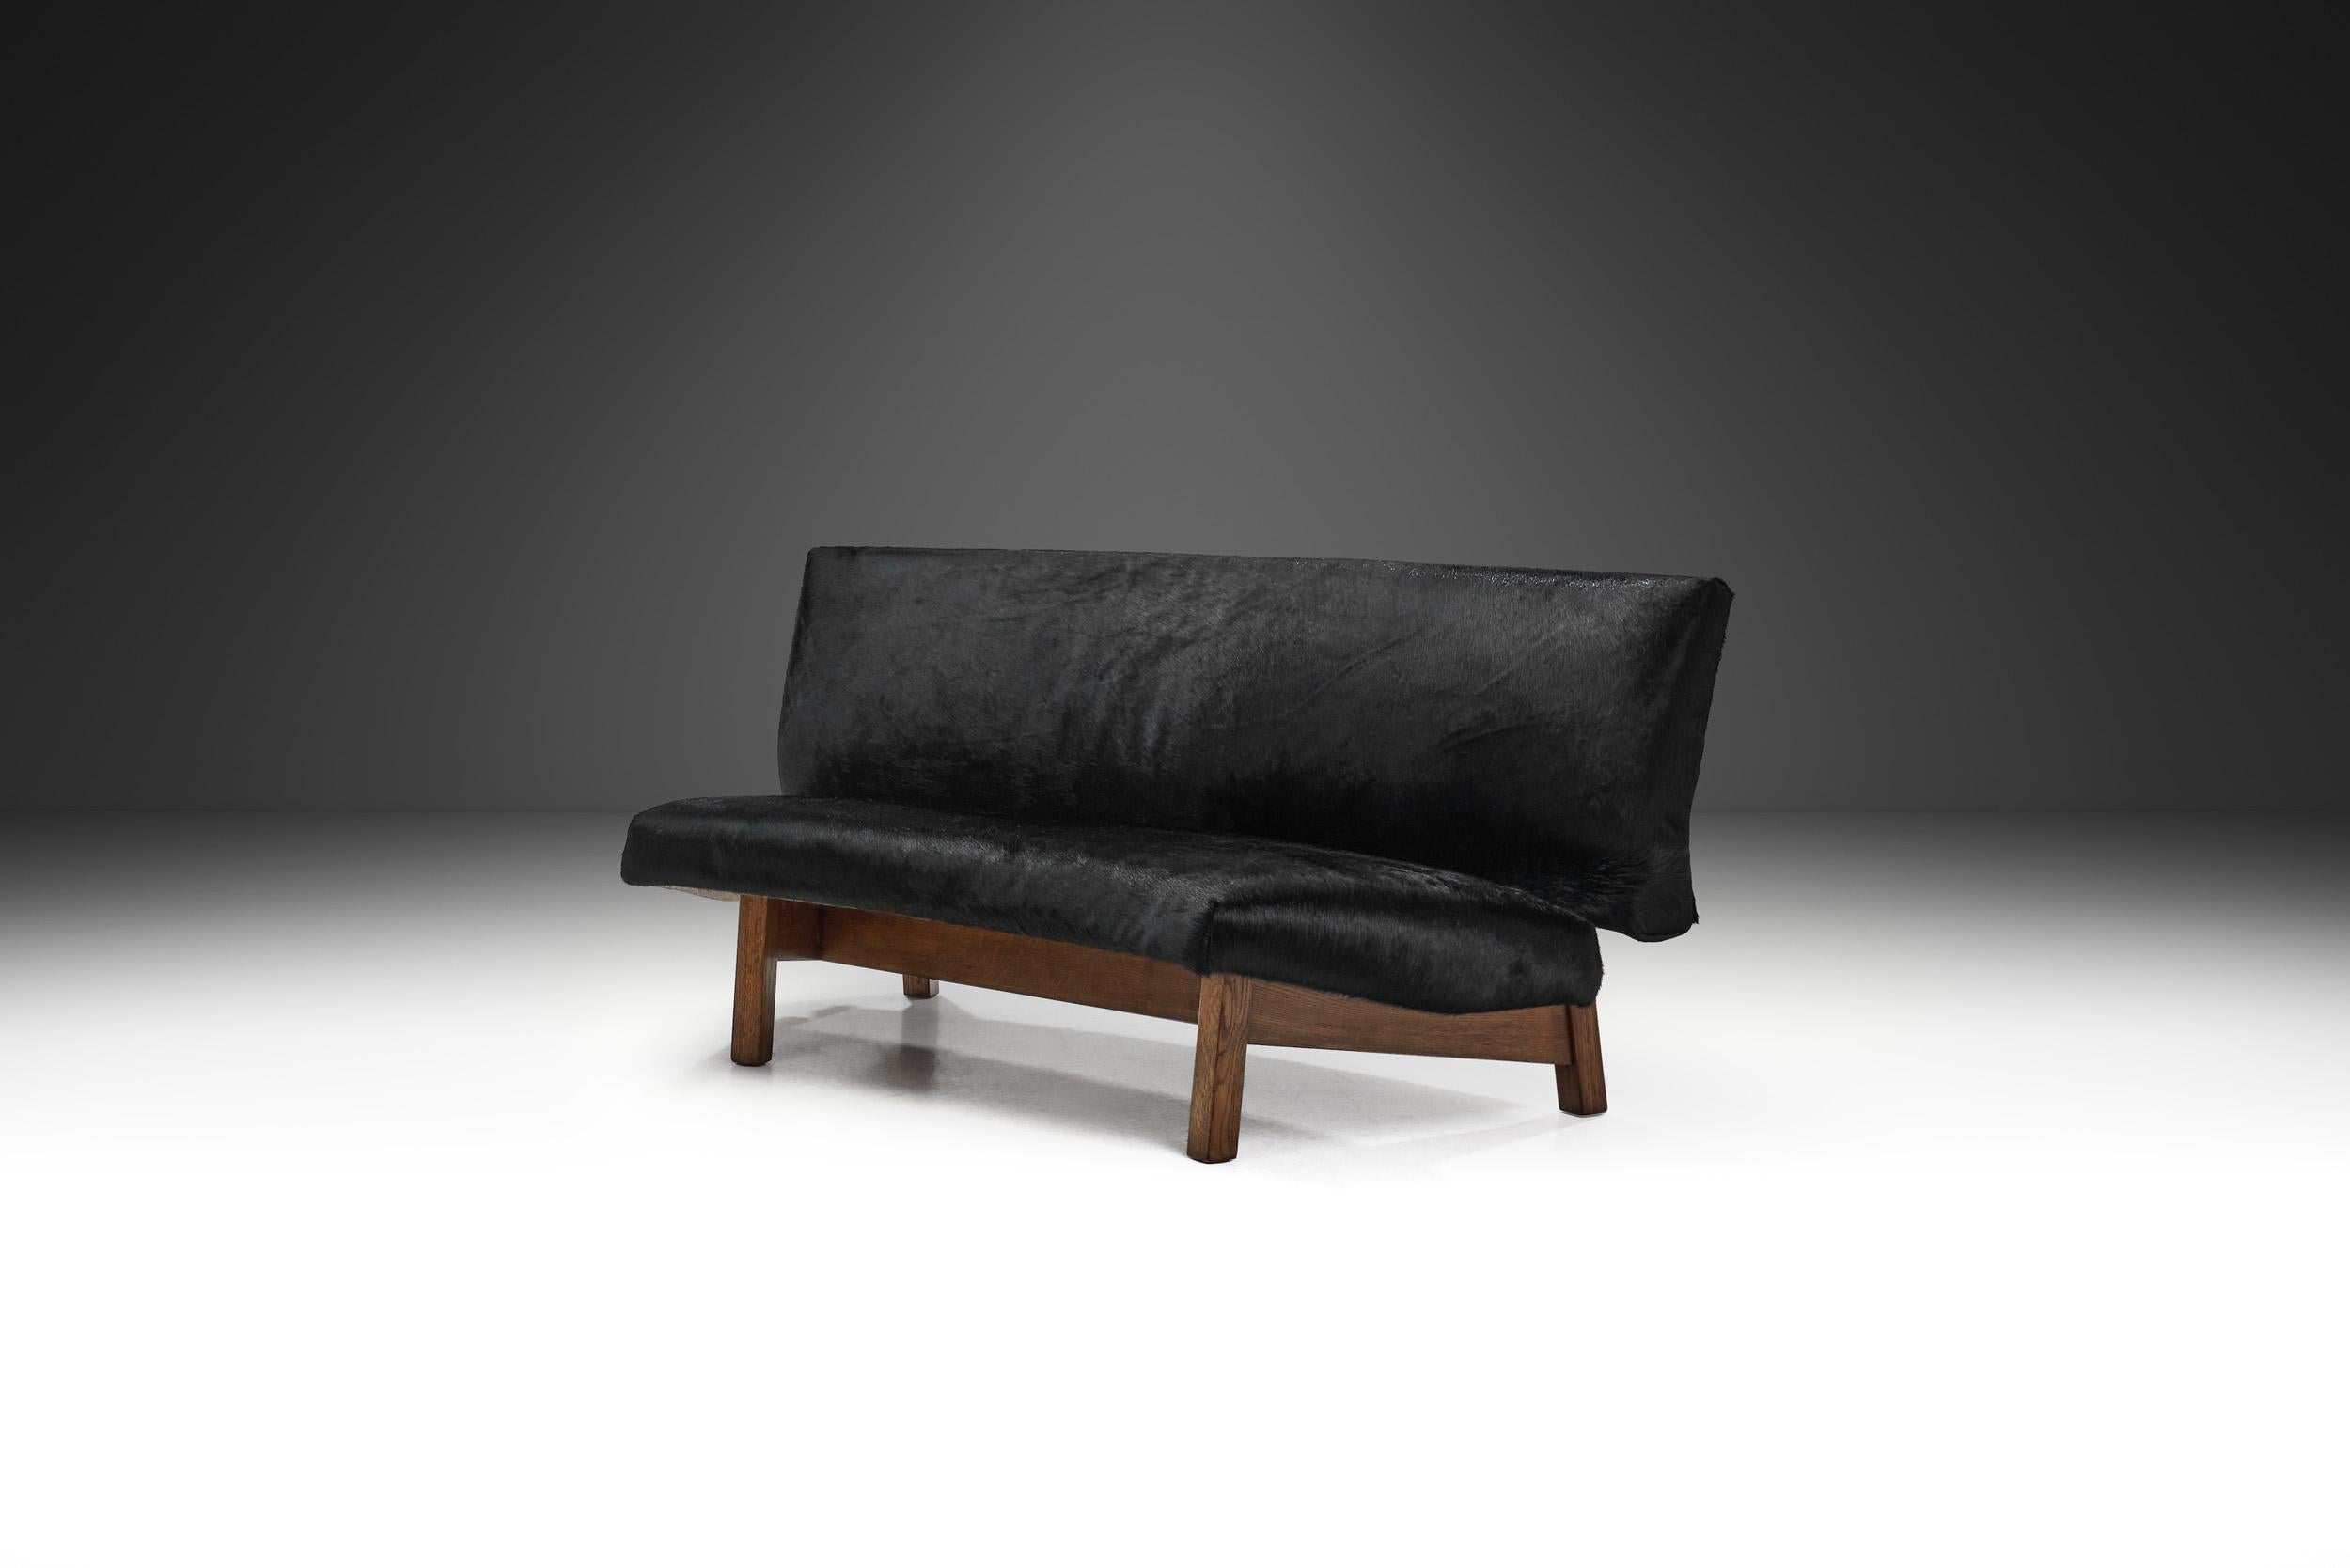 This unique curved sofa is simple and striking. Despite the understated, elegant colours, this model is still an accent piece that stands out thanks to its materials and appearance. The structure relies on an interior frame covered by the